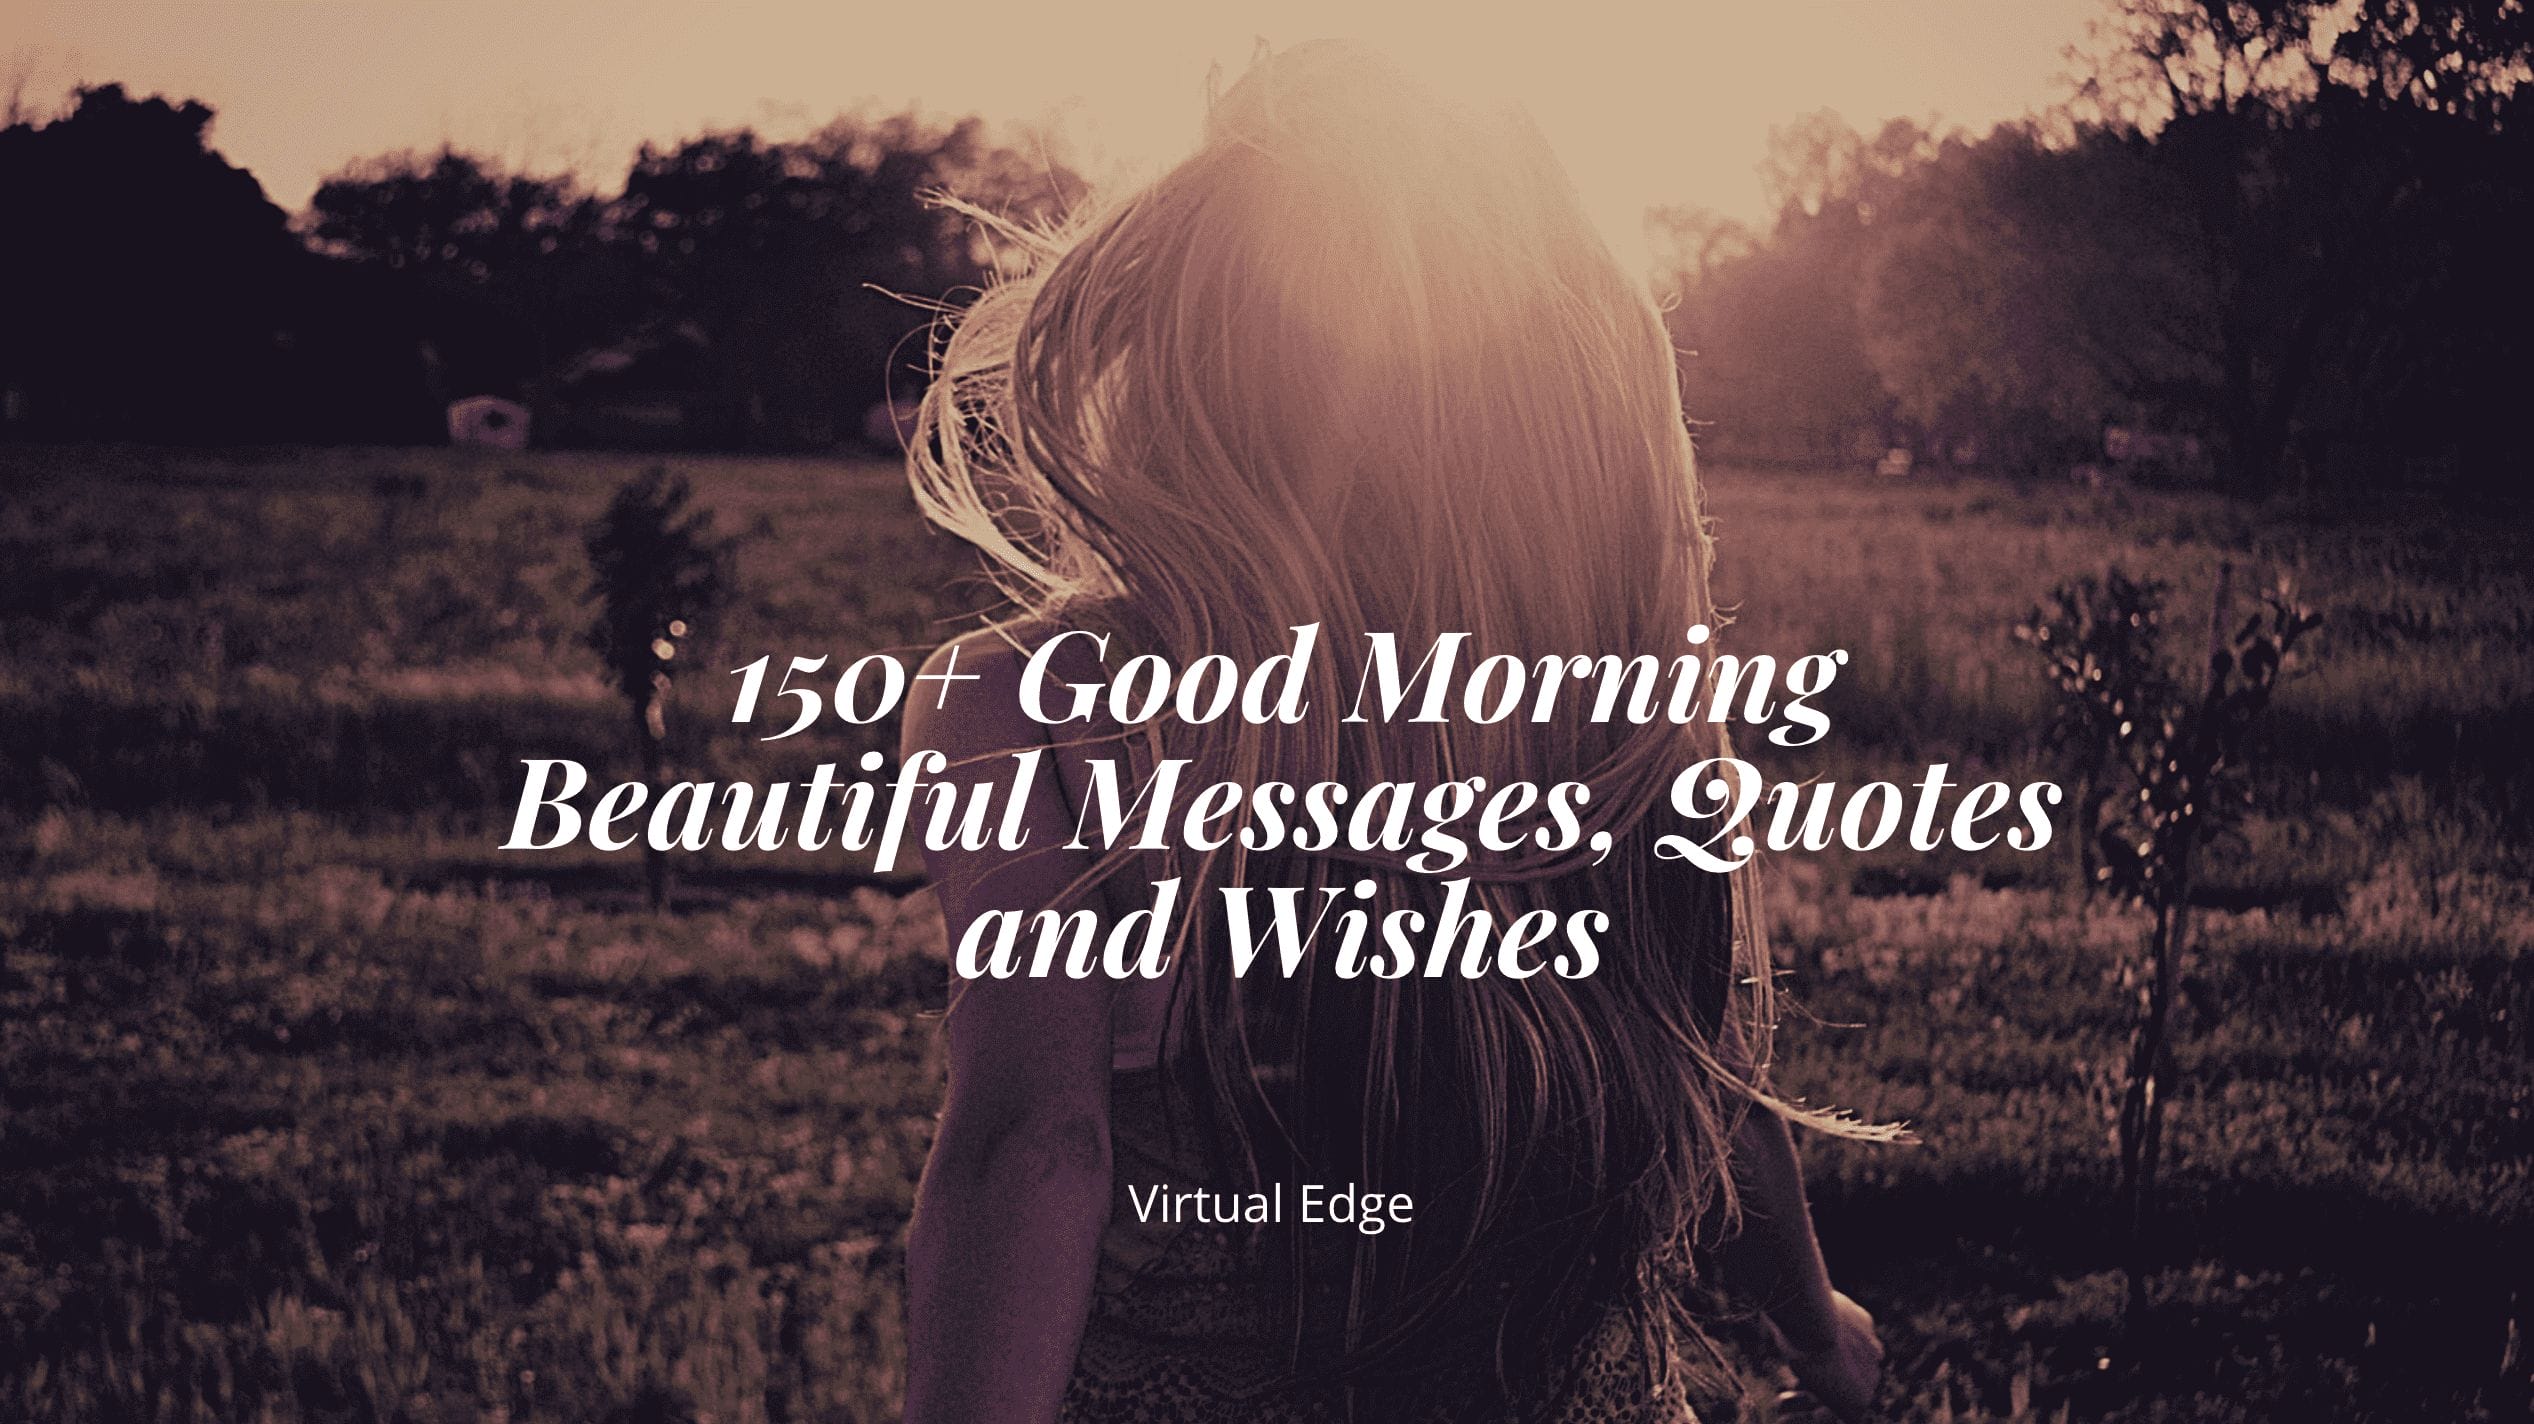 150+ Good Morning Beautiful Messages, Quotes and Wishes